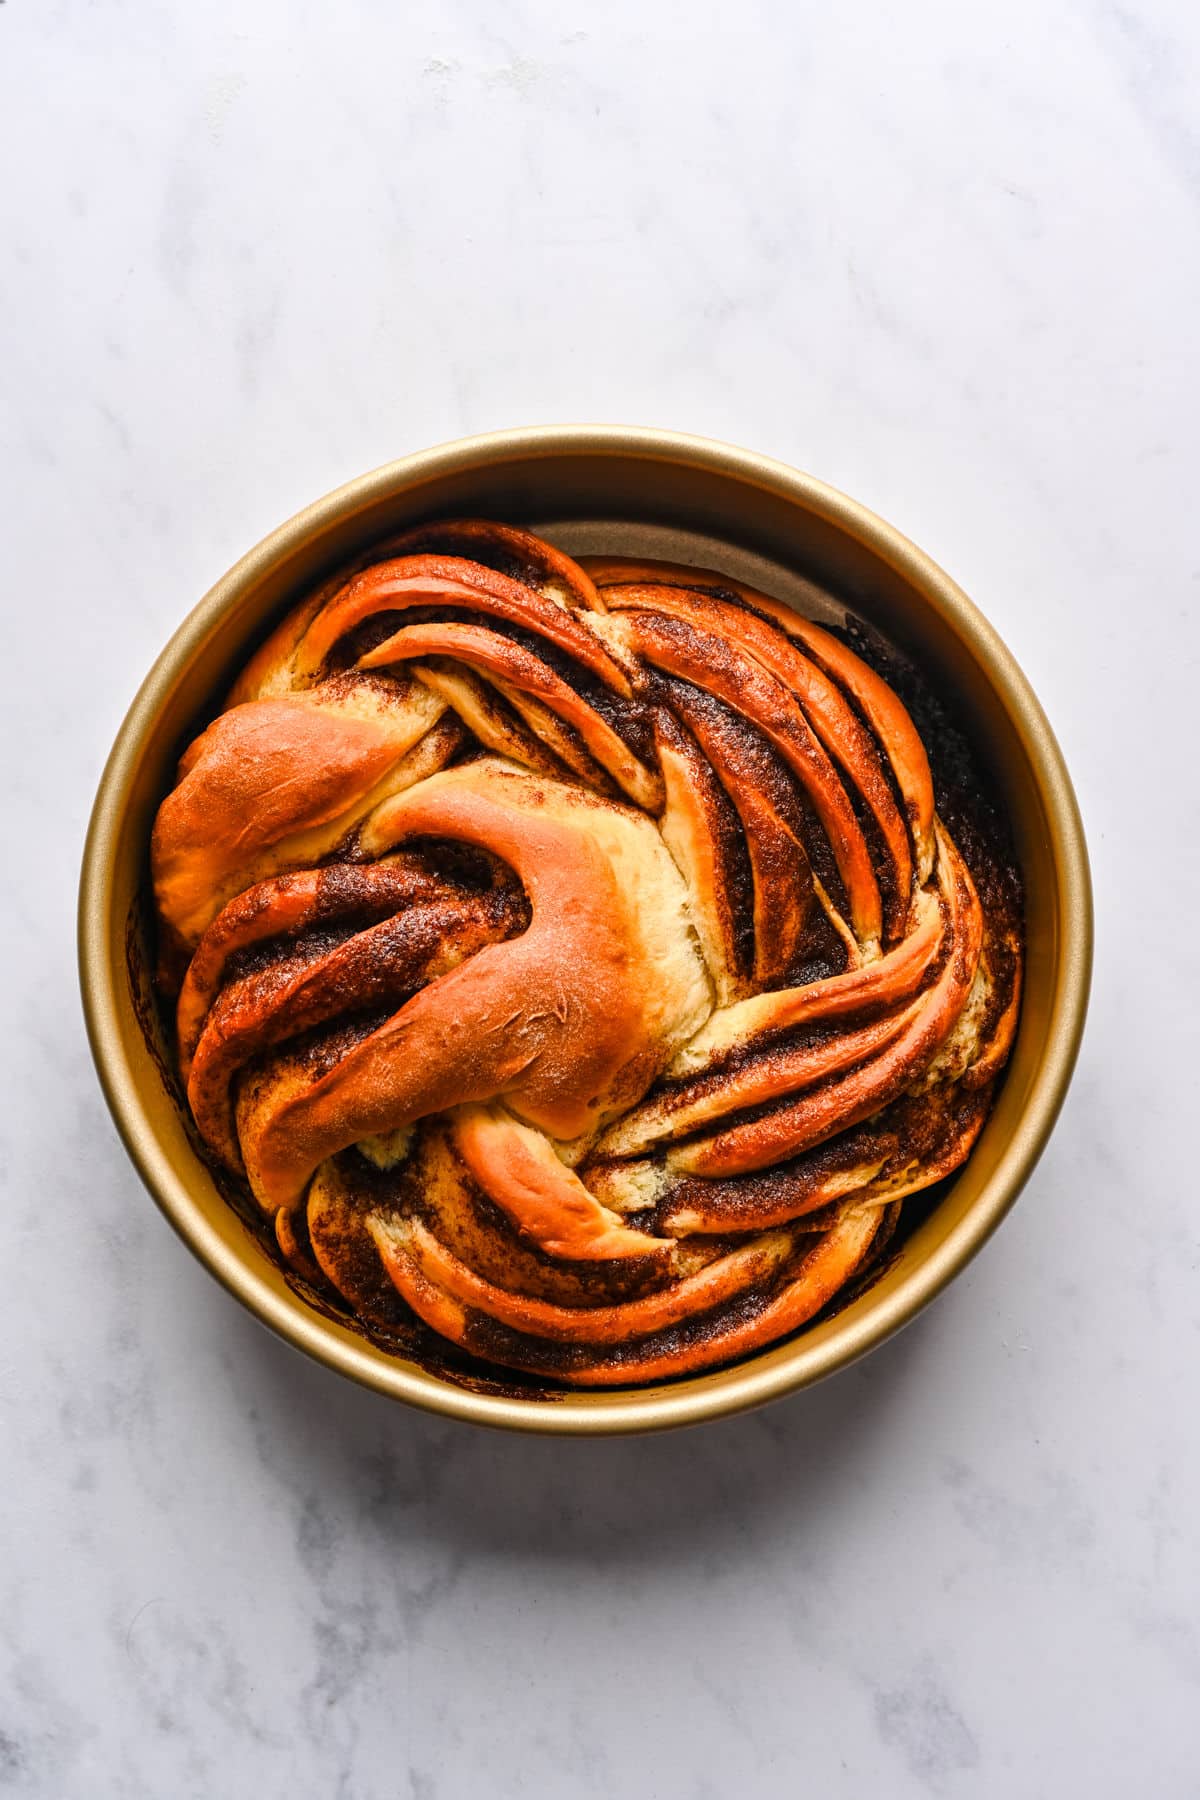 A baked loaf of braided cinnamon bread in a cake pan.